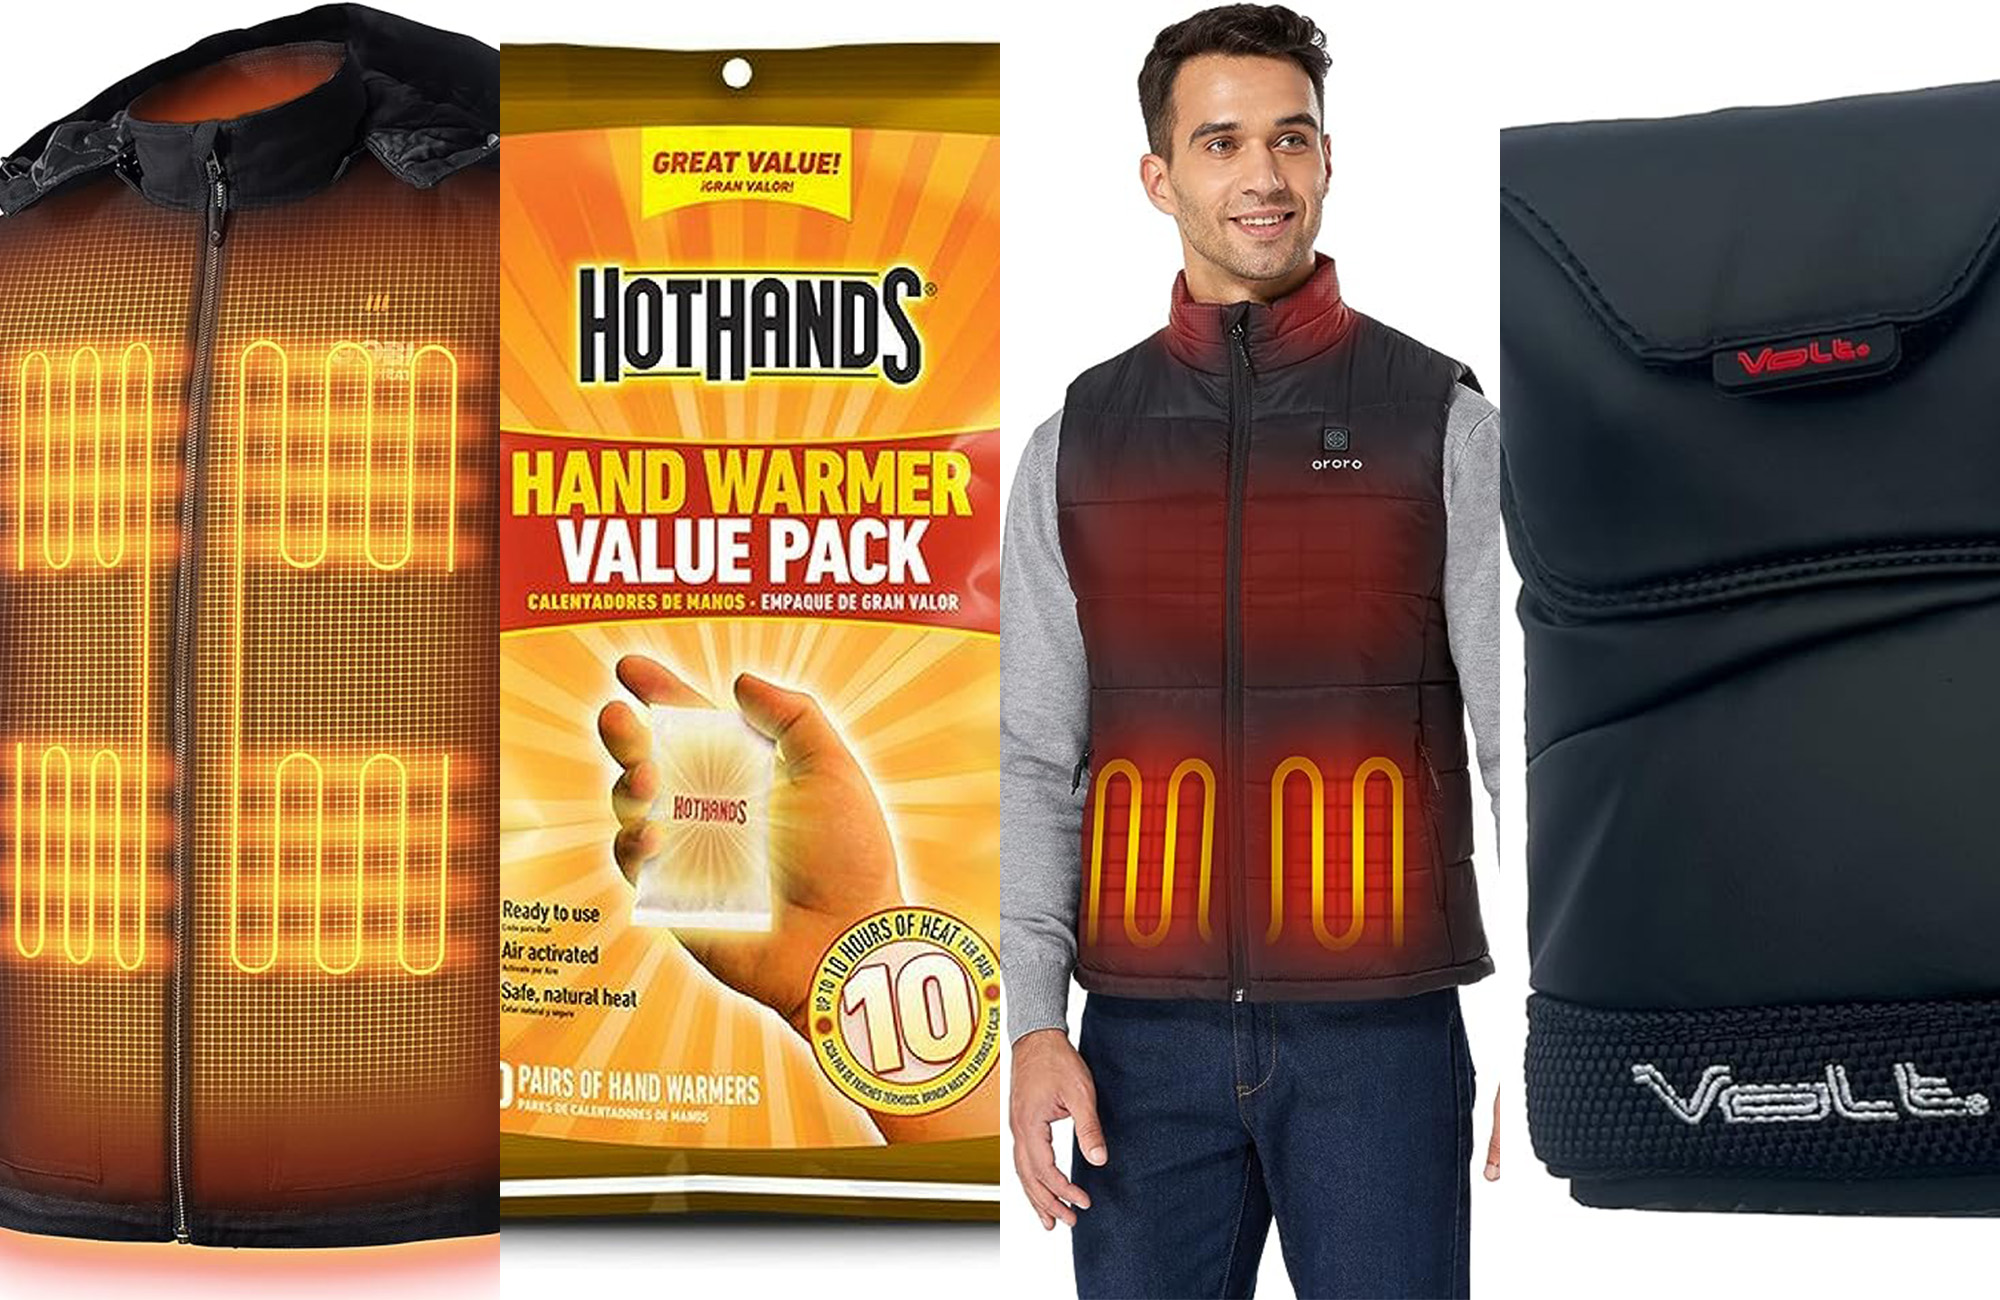 These Heated Pants Contain Heat Panels That Will Keep You Toasty